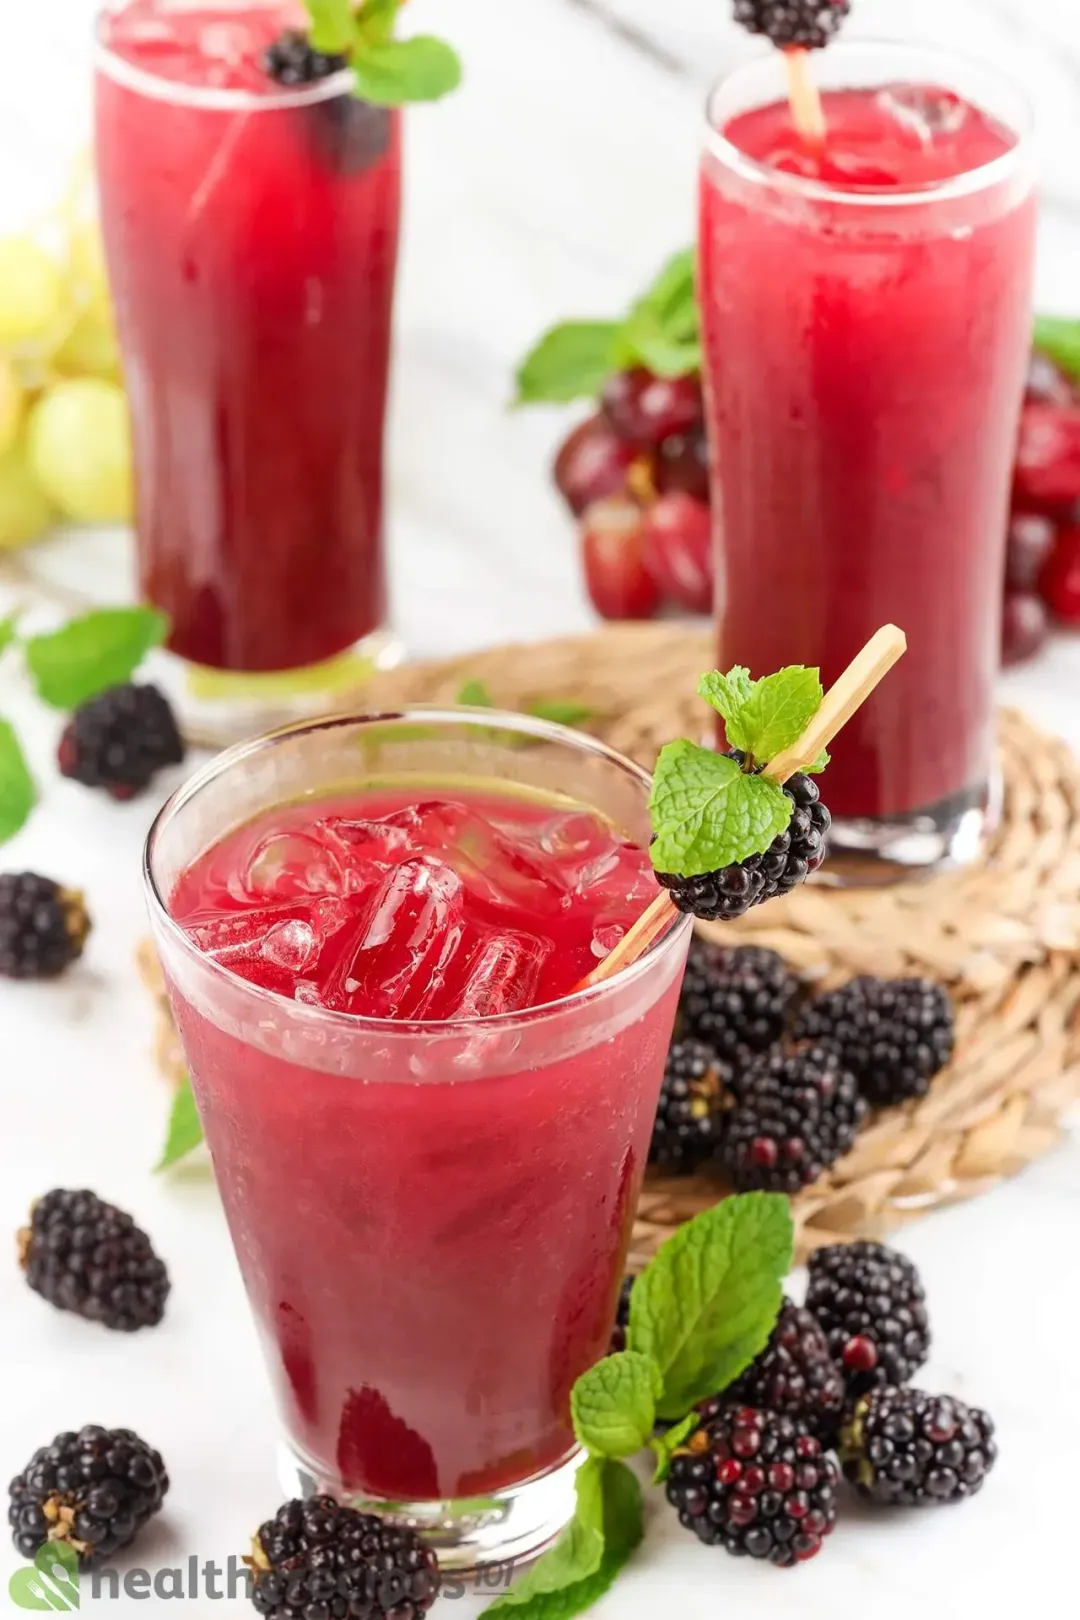 Three iced glasses of black berry juice drinks, with blackberries and mints all lying around